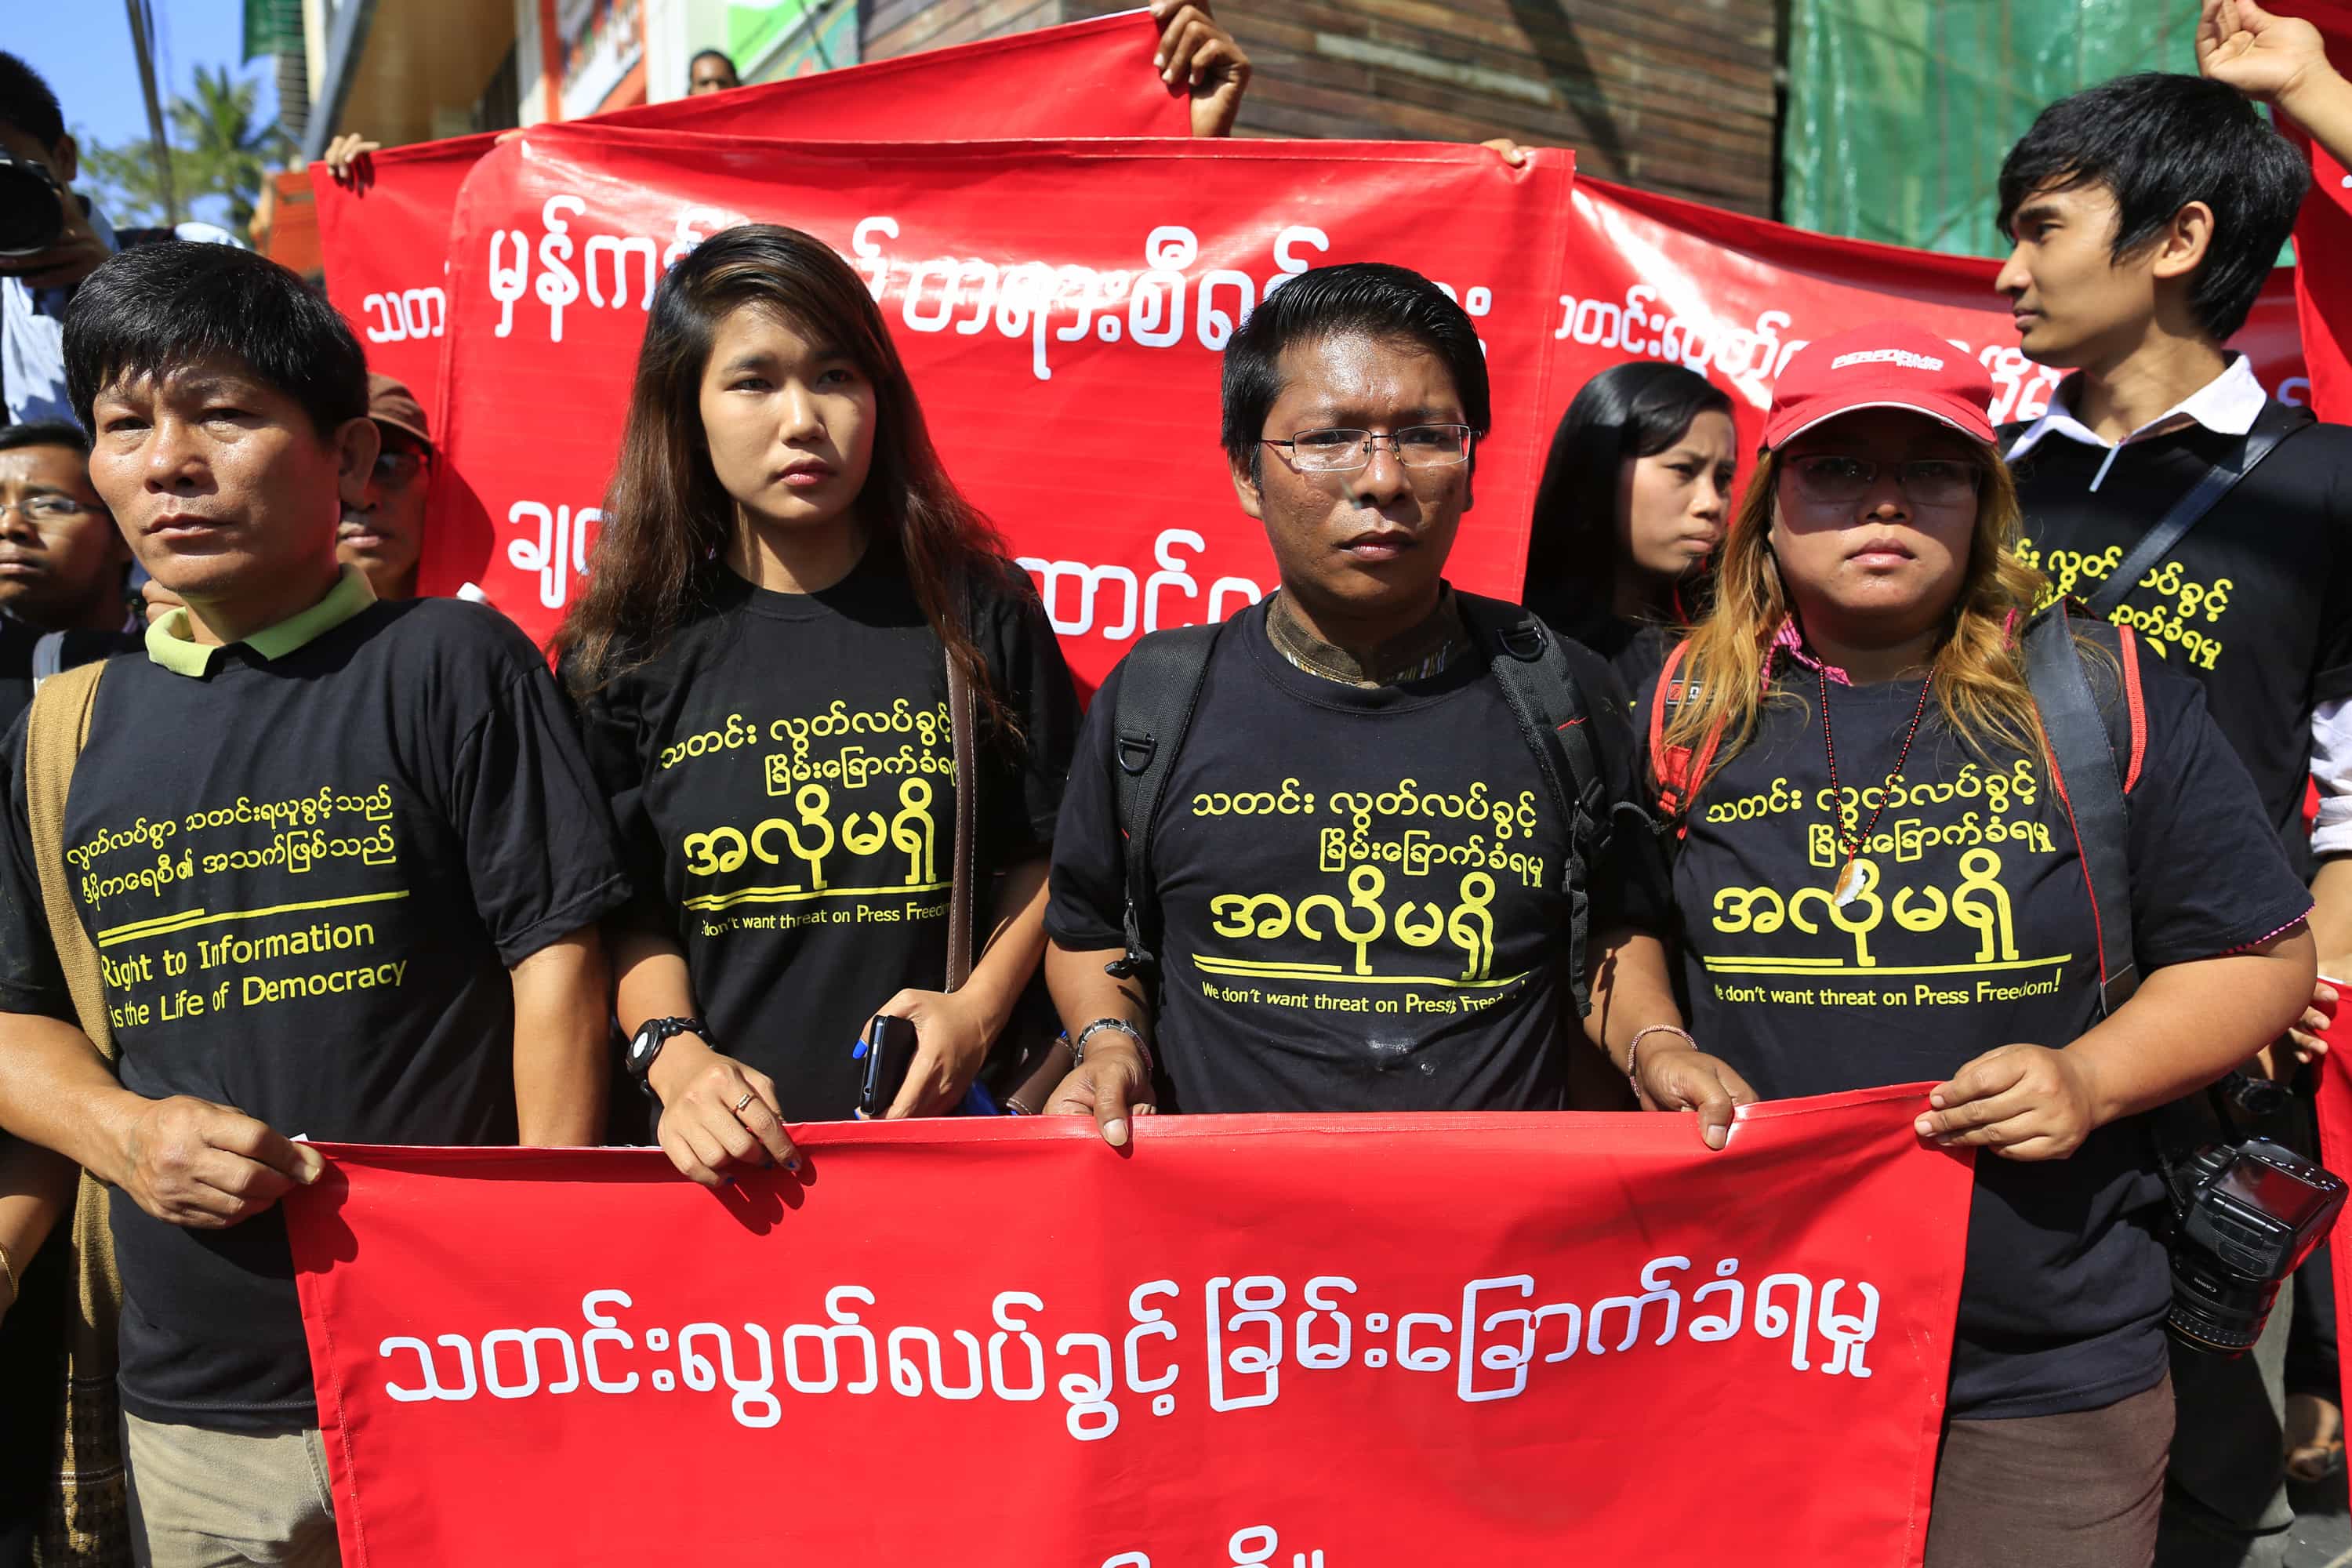 Reporters march for press freedom in Yangon, 7 January 2014; the banners read: "We don't want threats to press freedom", REUTERS/Soe Zeya Tun